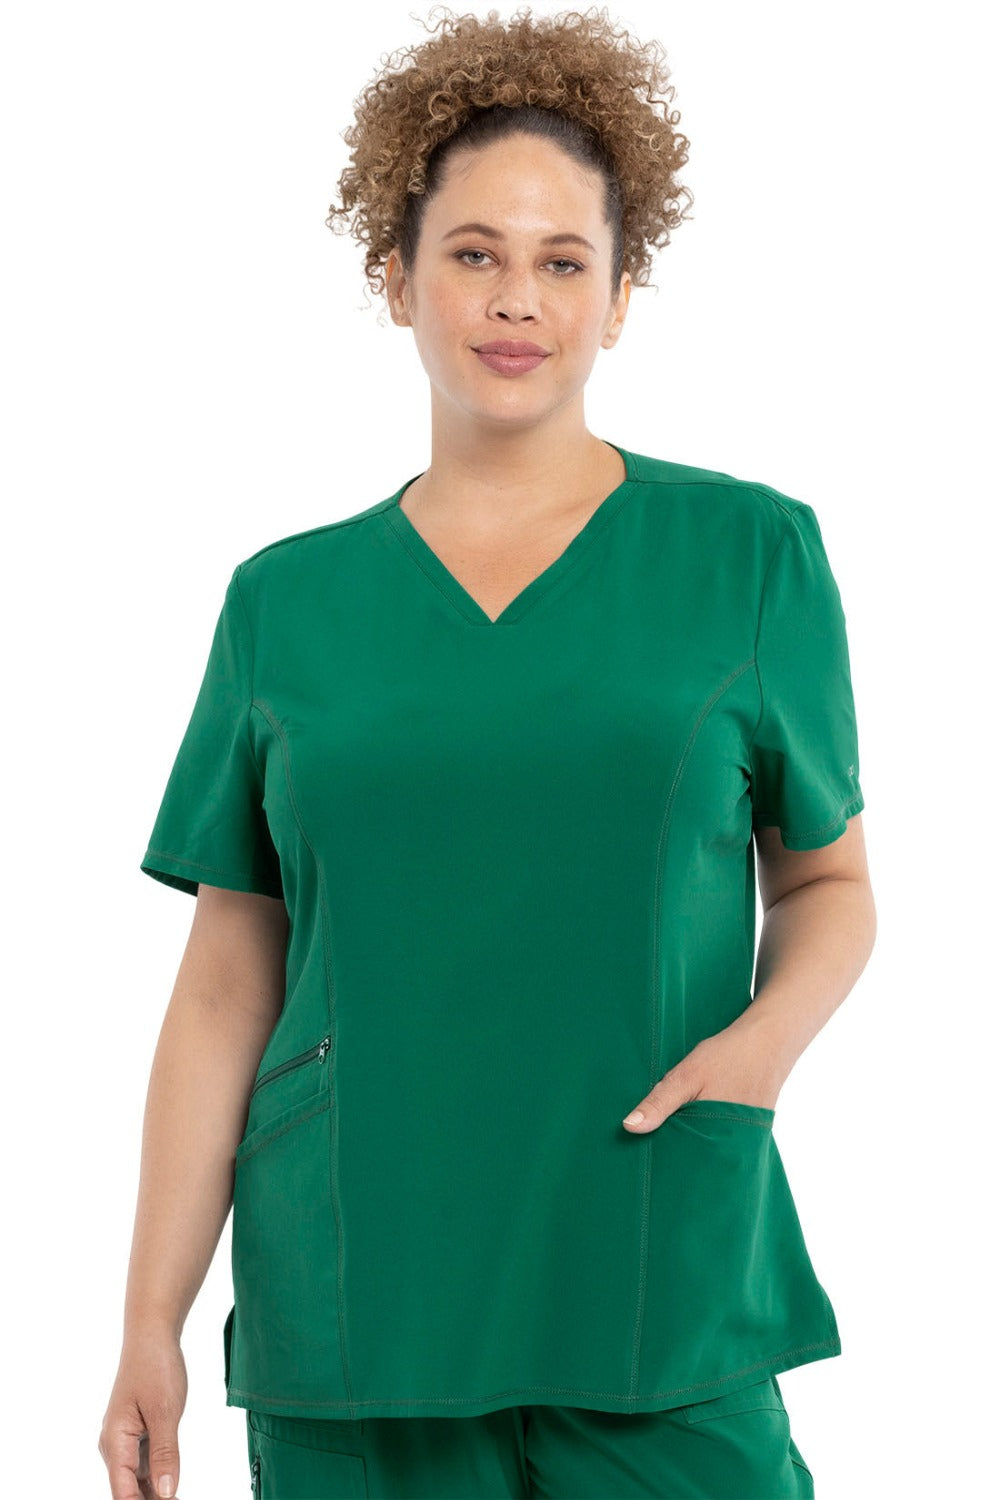 Cherokee Allura V-Neck Scrub Top in Hunter at Parker's Clothing and Shoes.